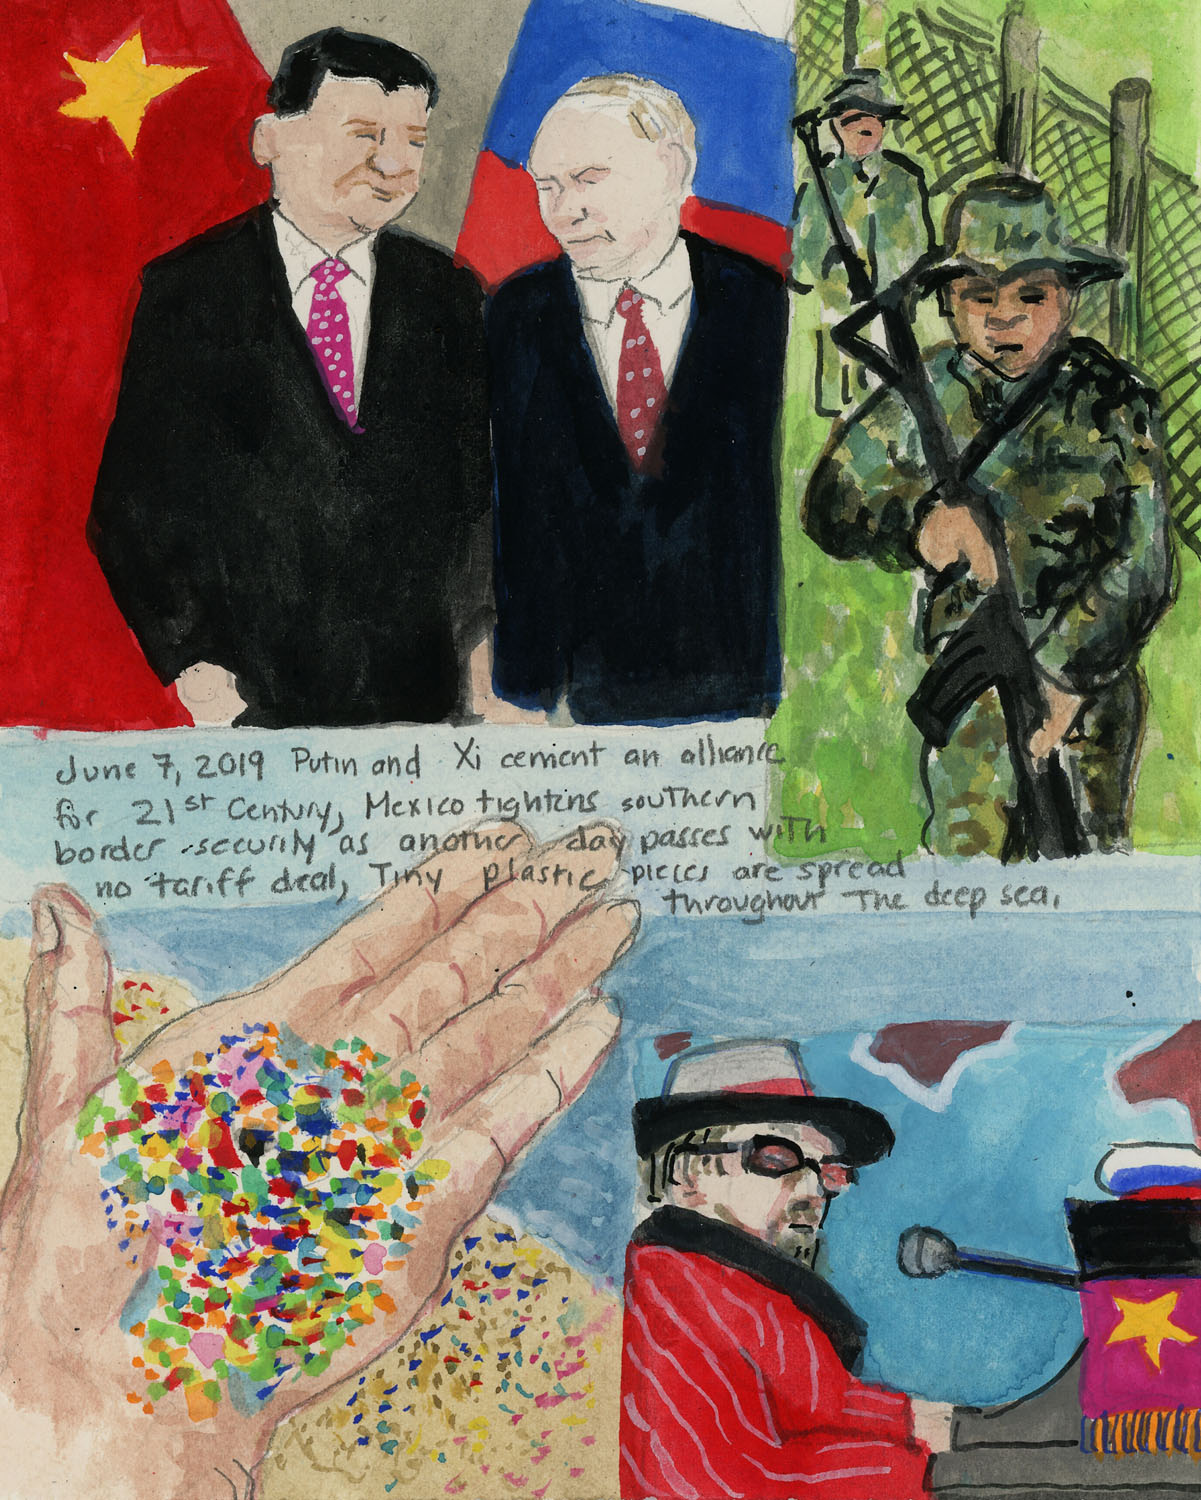 Day 1,294 (June 7, 2019) <br>Gouache, Watercolor, graphite on paper, 7 ½ x 6 in.<br><i>Putin and Xi cement an alliance for 21st century, Mexico tightens southern border security as another day passes with no tariff deal, Tiny plastic pieces are spread throughout the deep sea.</i>